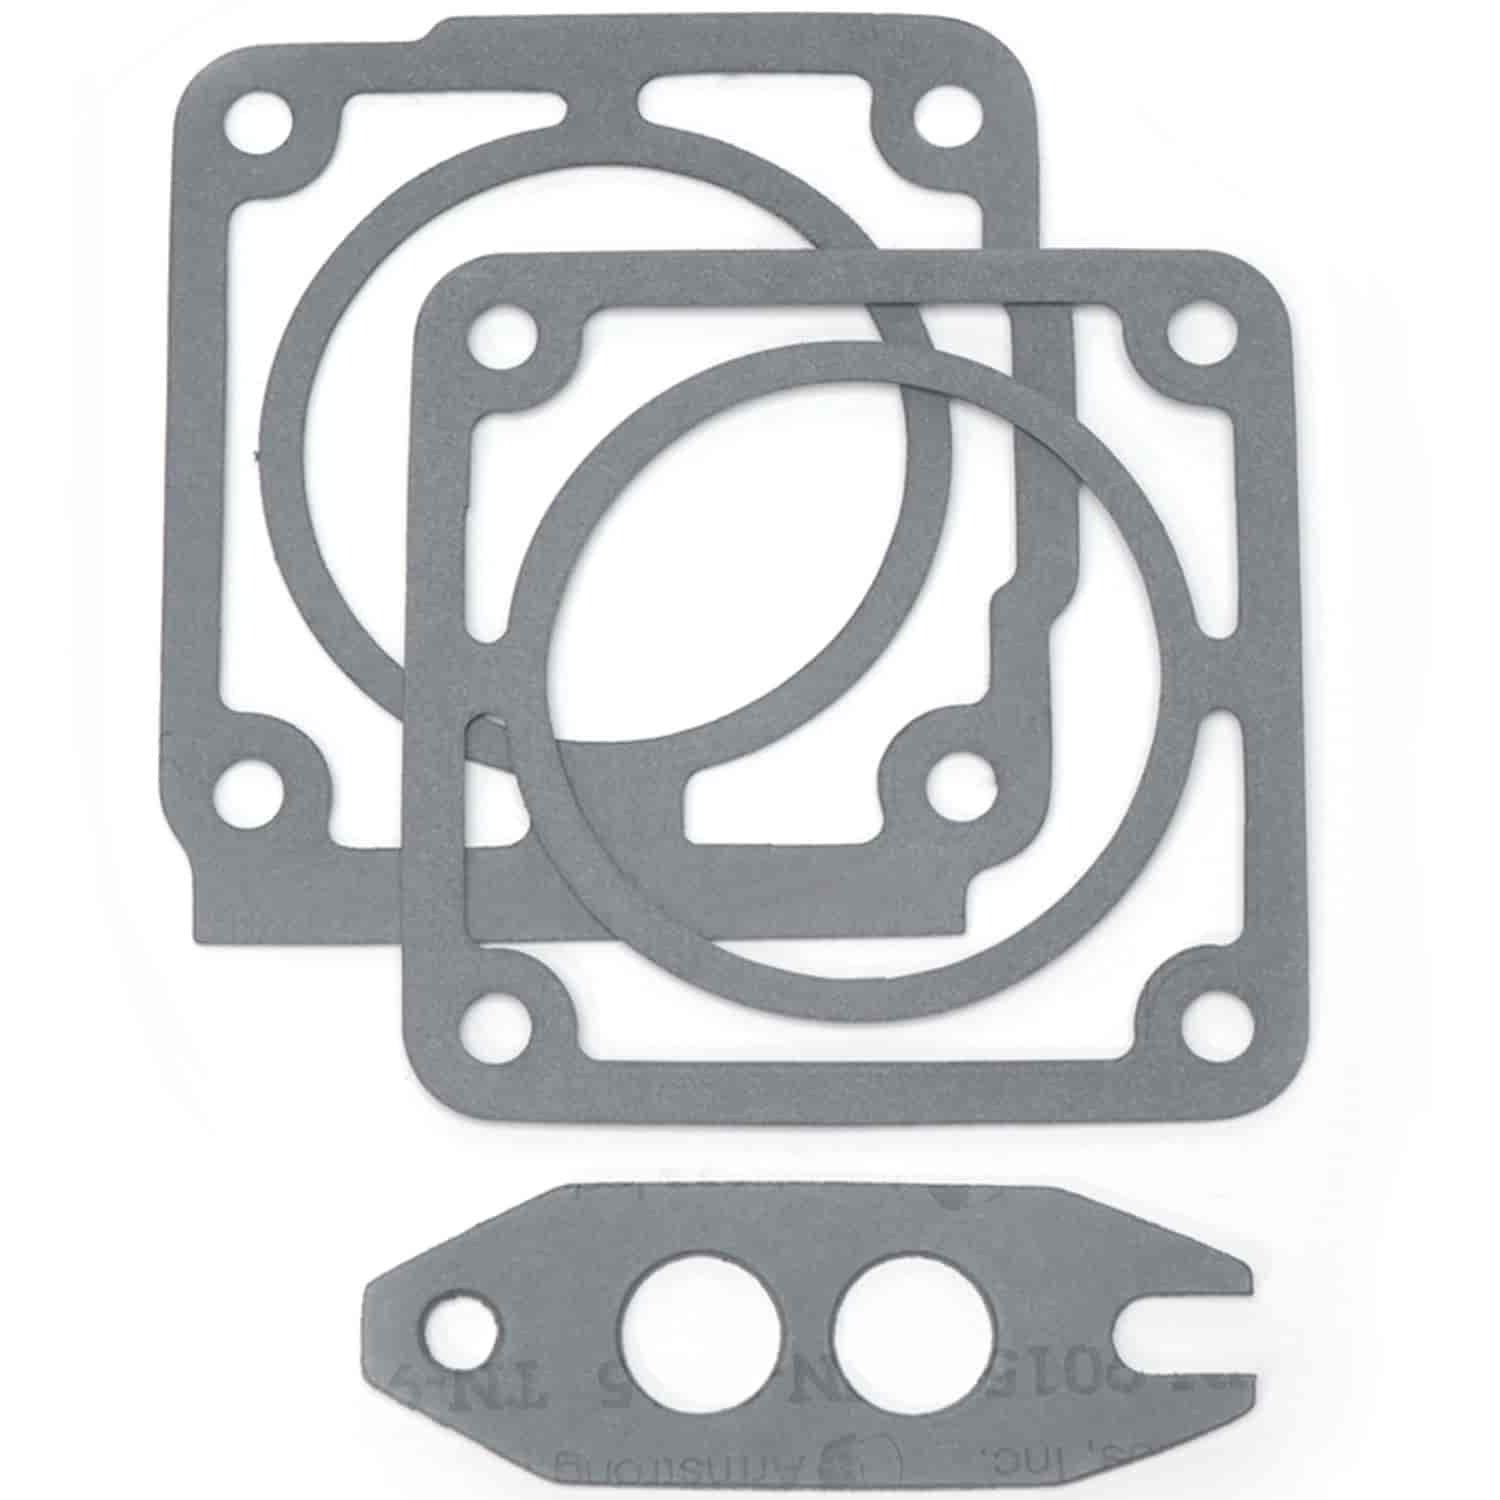 65mm and 70mm Throttle Body Gasket Set for 1986-1993 5.0L Mustang